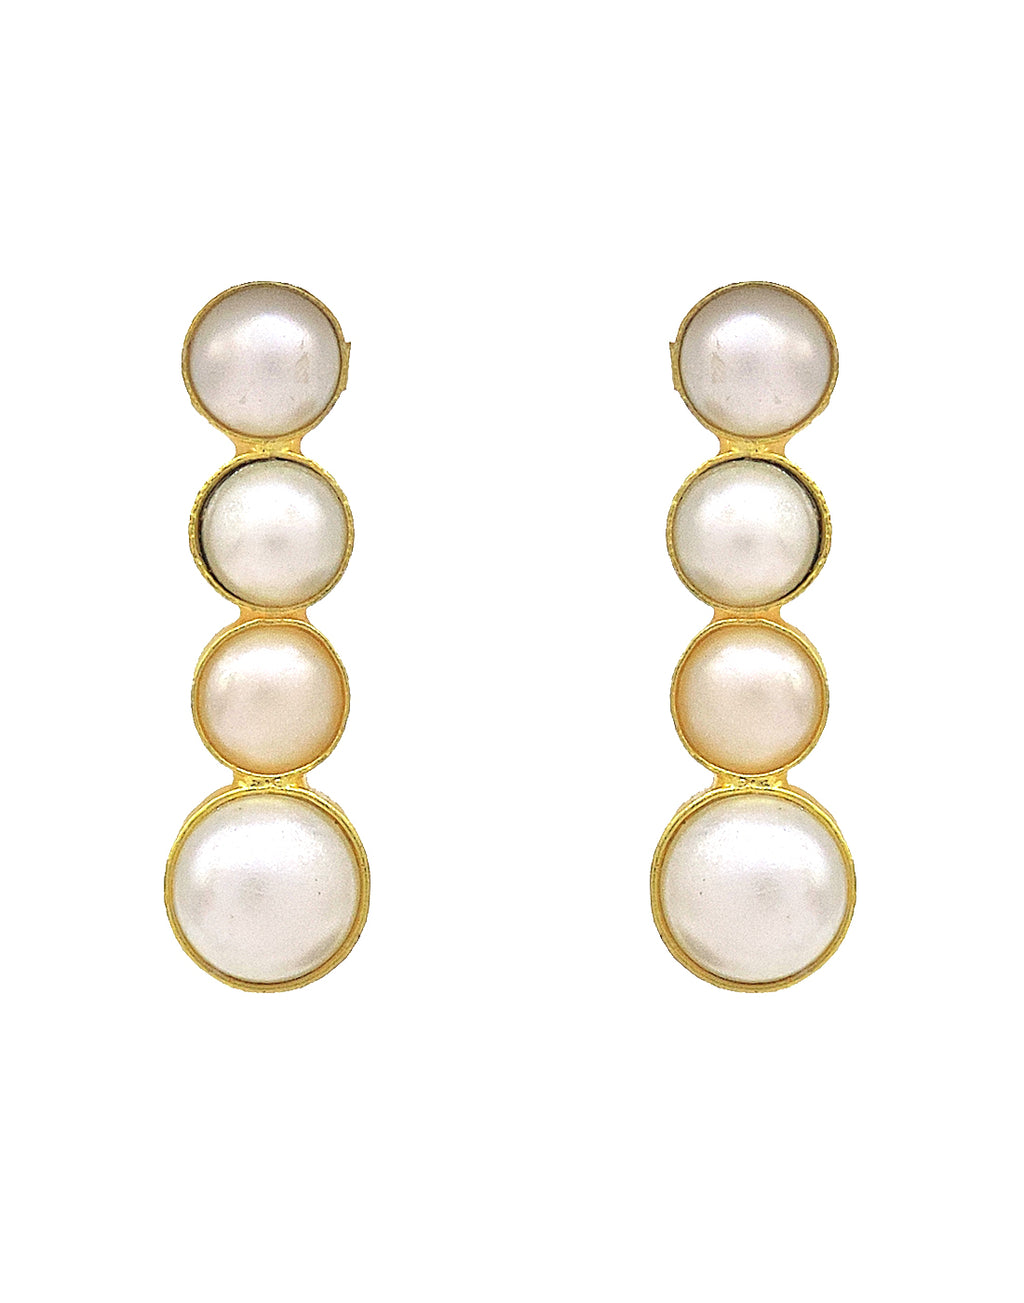 Pearl Quad Earrings - Statement Earrings - Gold-Plated & Hypoallergenic - Made in India - Dubai Jewellery - Dori